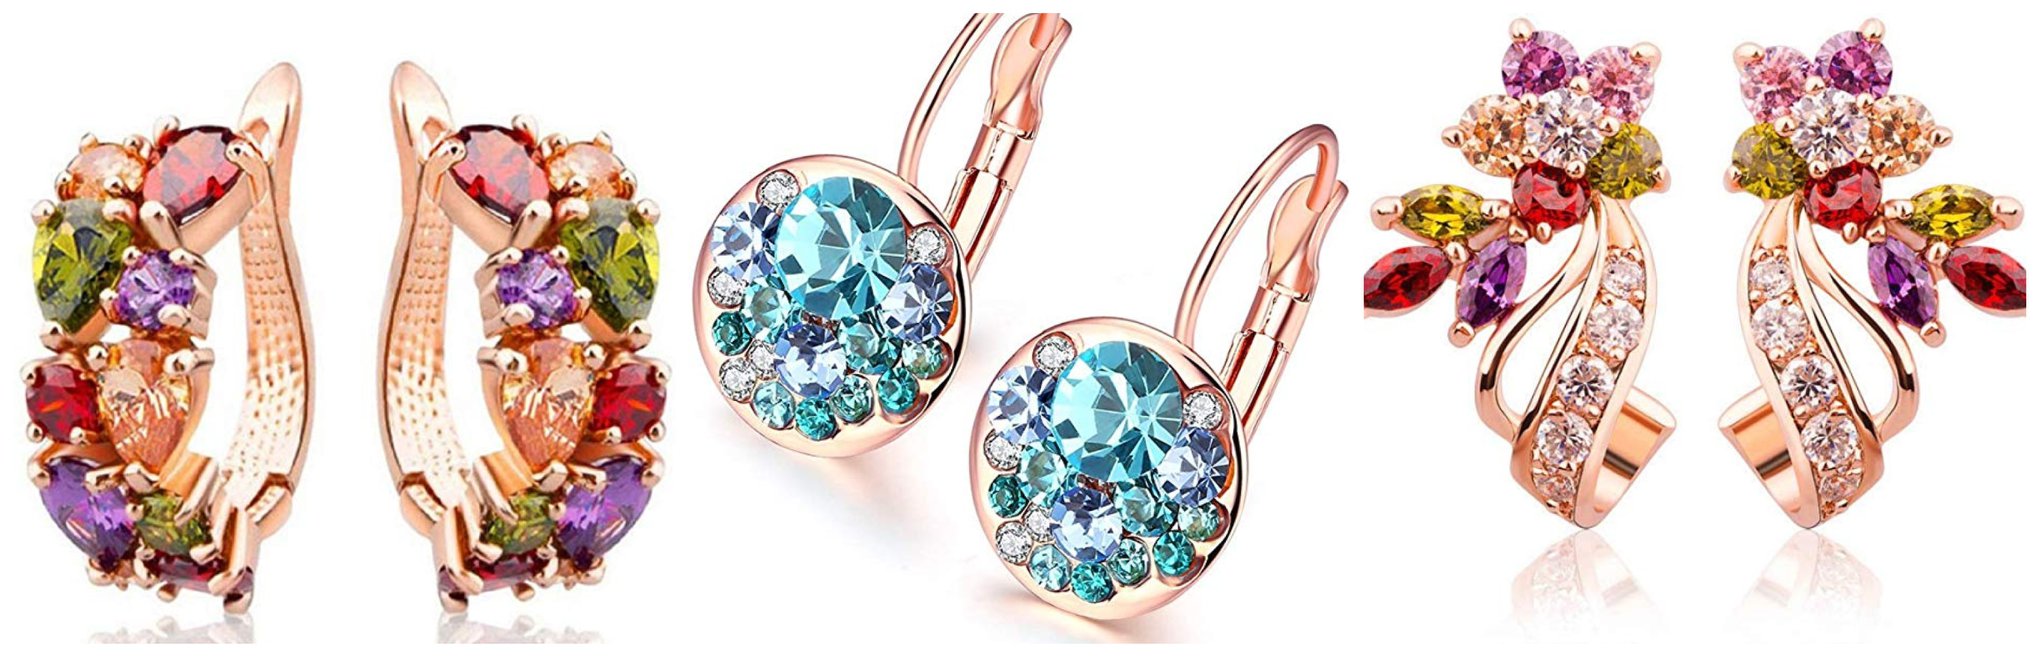 Blue Crystals Round Clip-on Earrings for Women  for $7.19 w/code 